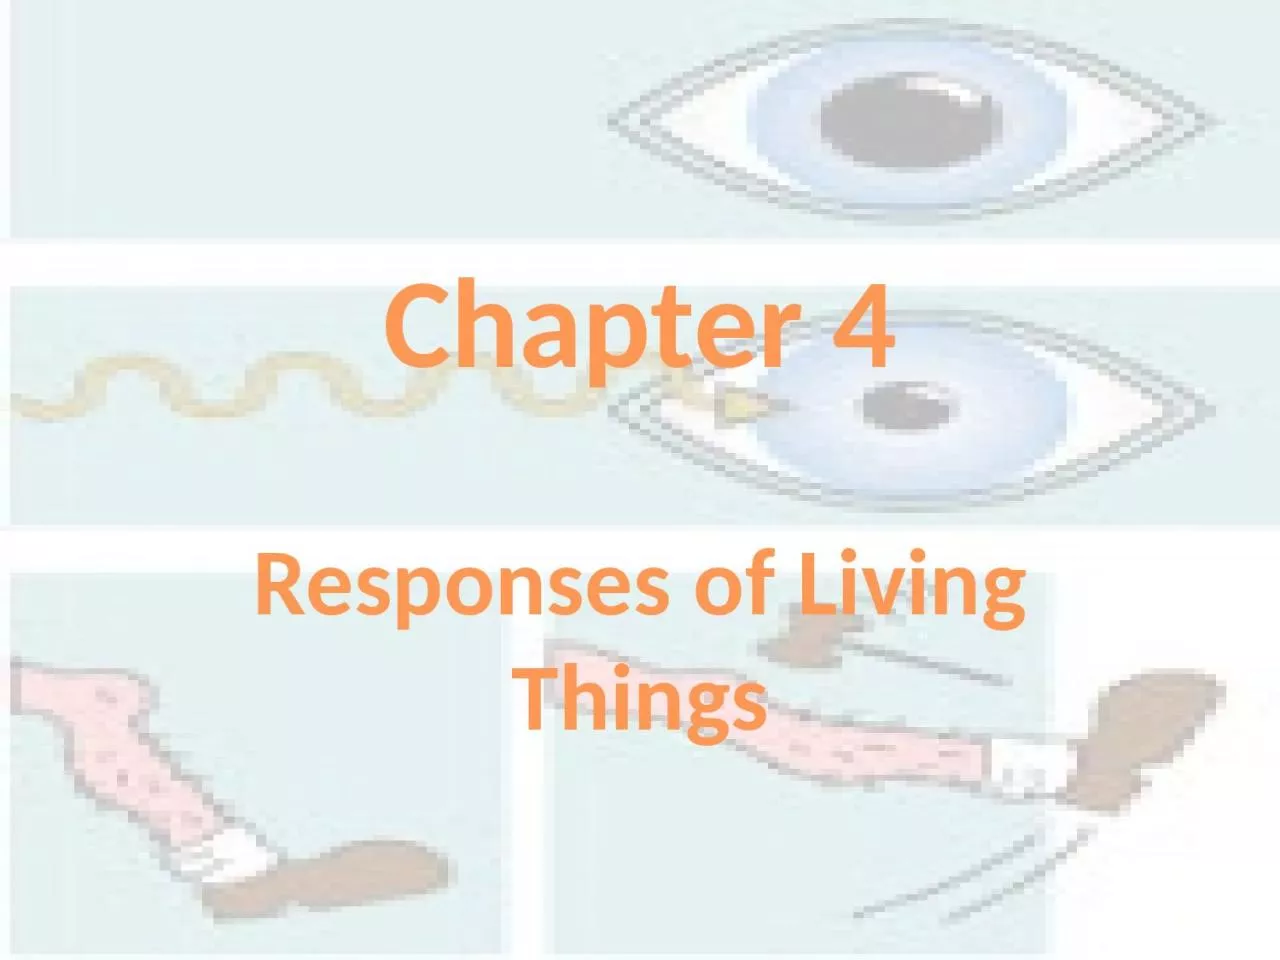 Chapter 4 Responses of Living Things